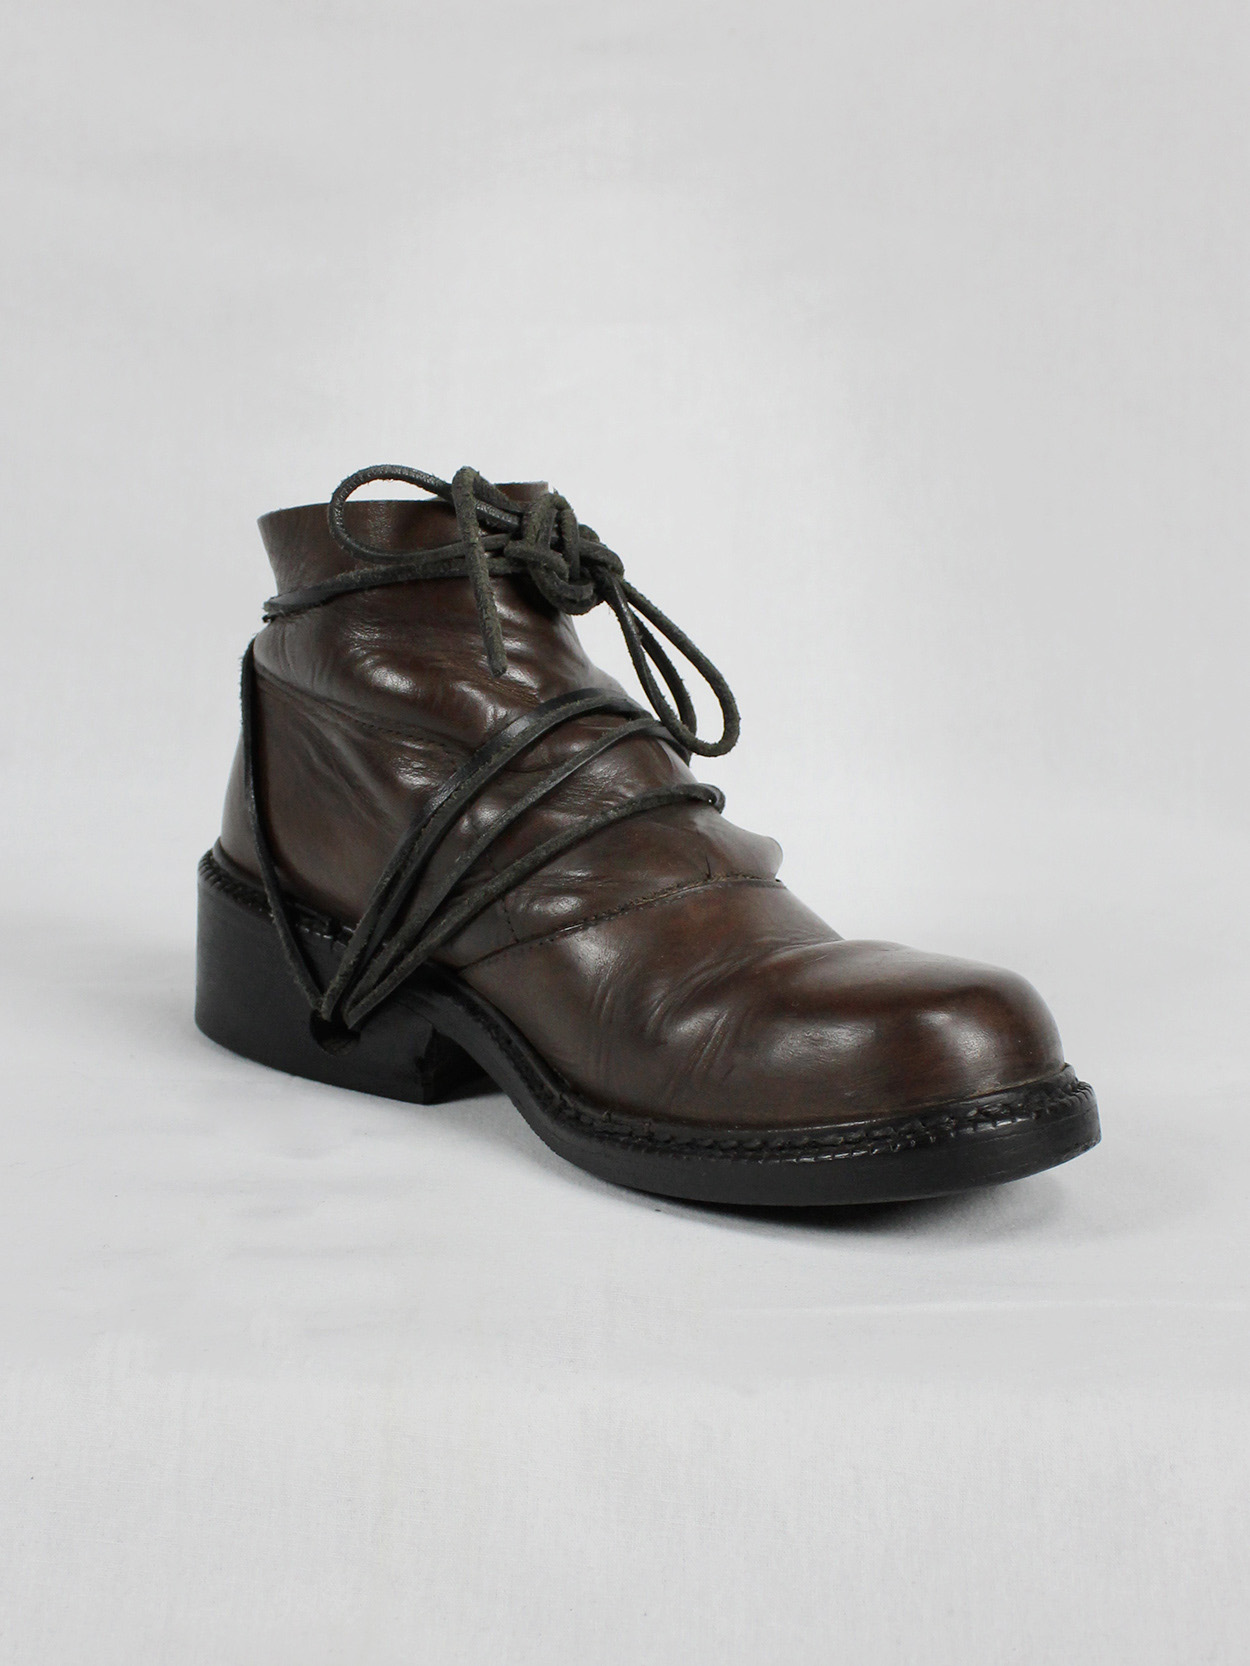 Dirk Bikkembergs brown boots with flap and laces through the soles (45) — fall 1994